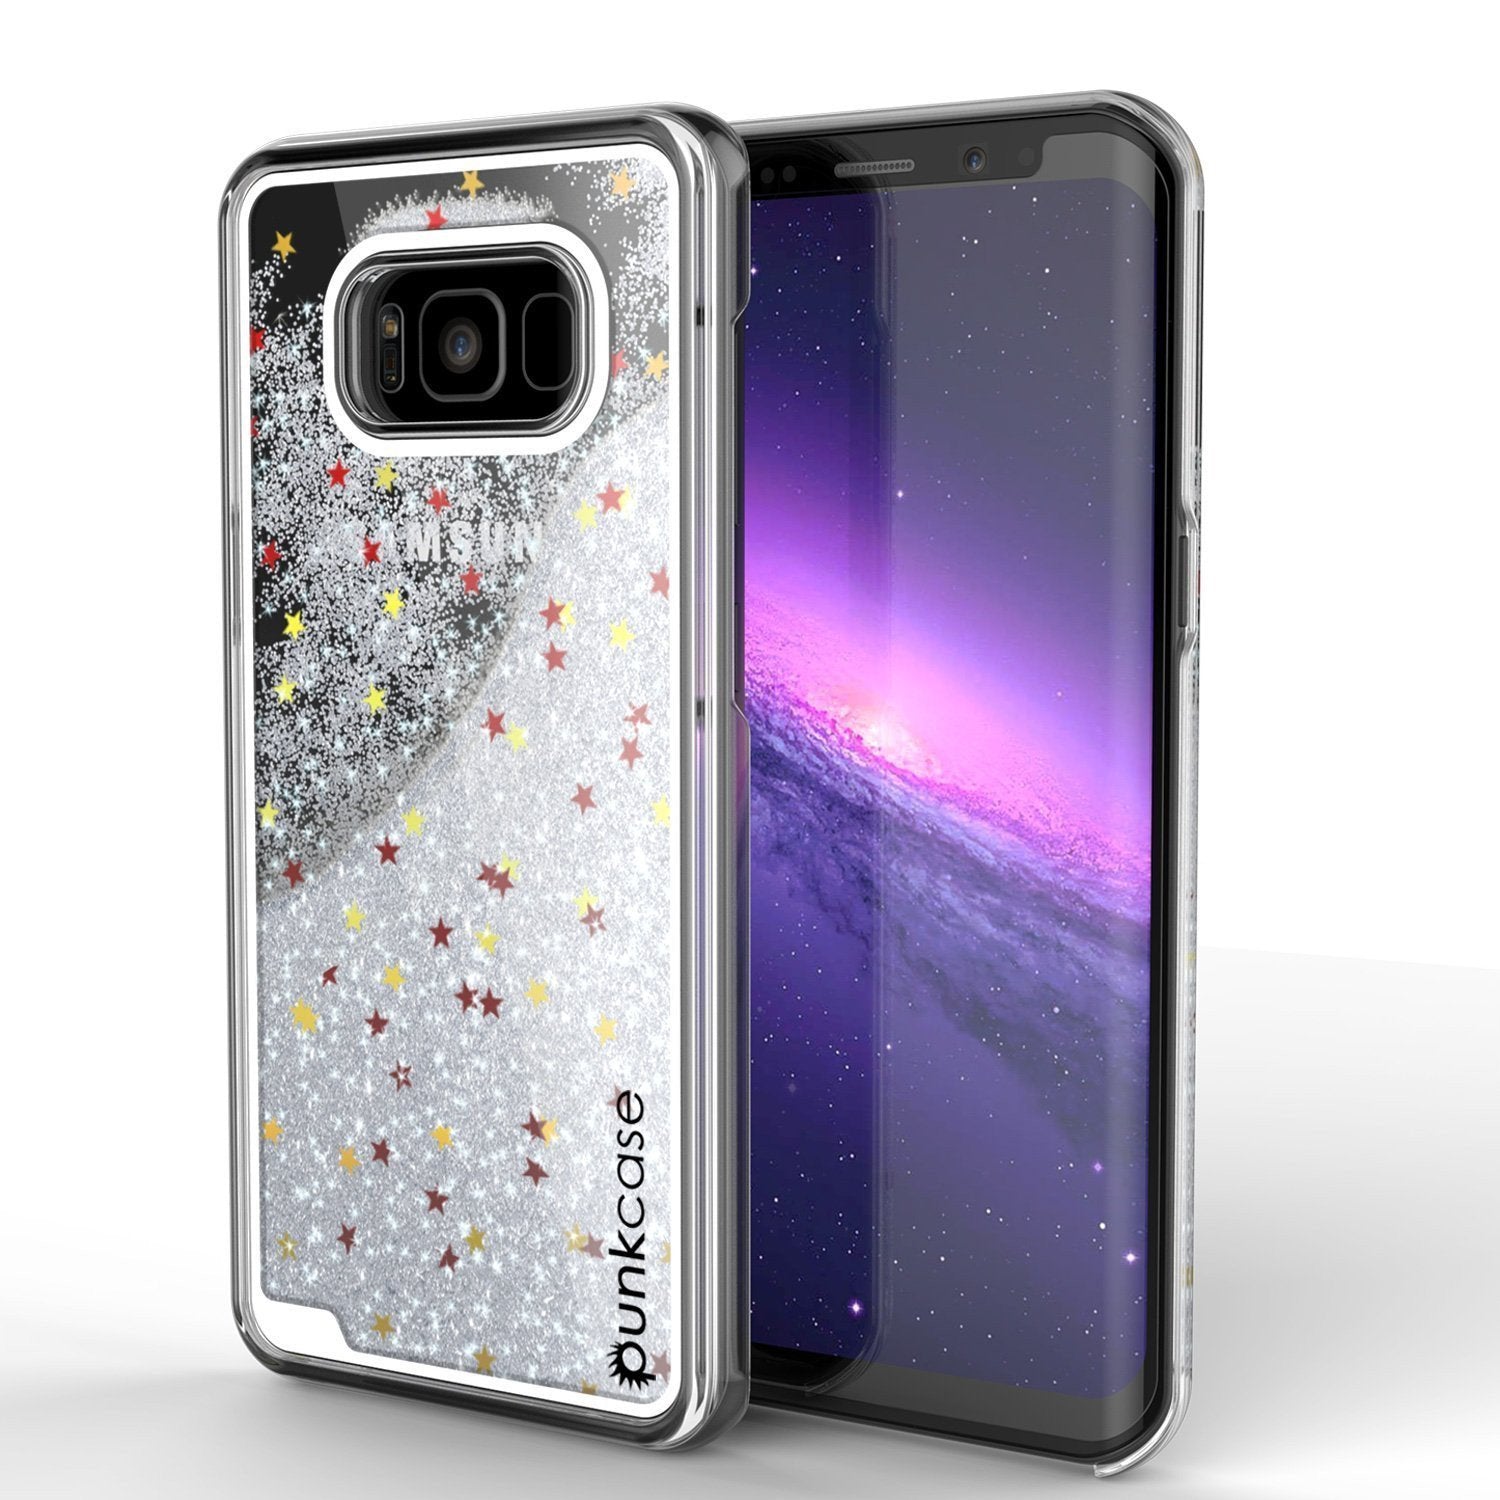 Galaxy S8 Case, Punkcase [Liquid Series] Protective Dual Layer Floating Glitter Cover with lots of Bling & Sparkle + PunkShield Screen Protector for Samsung S8 [Silver]